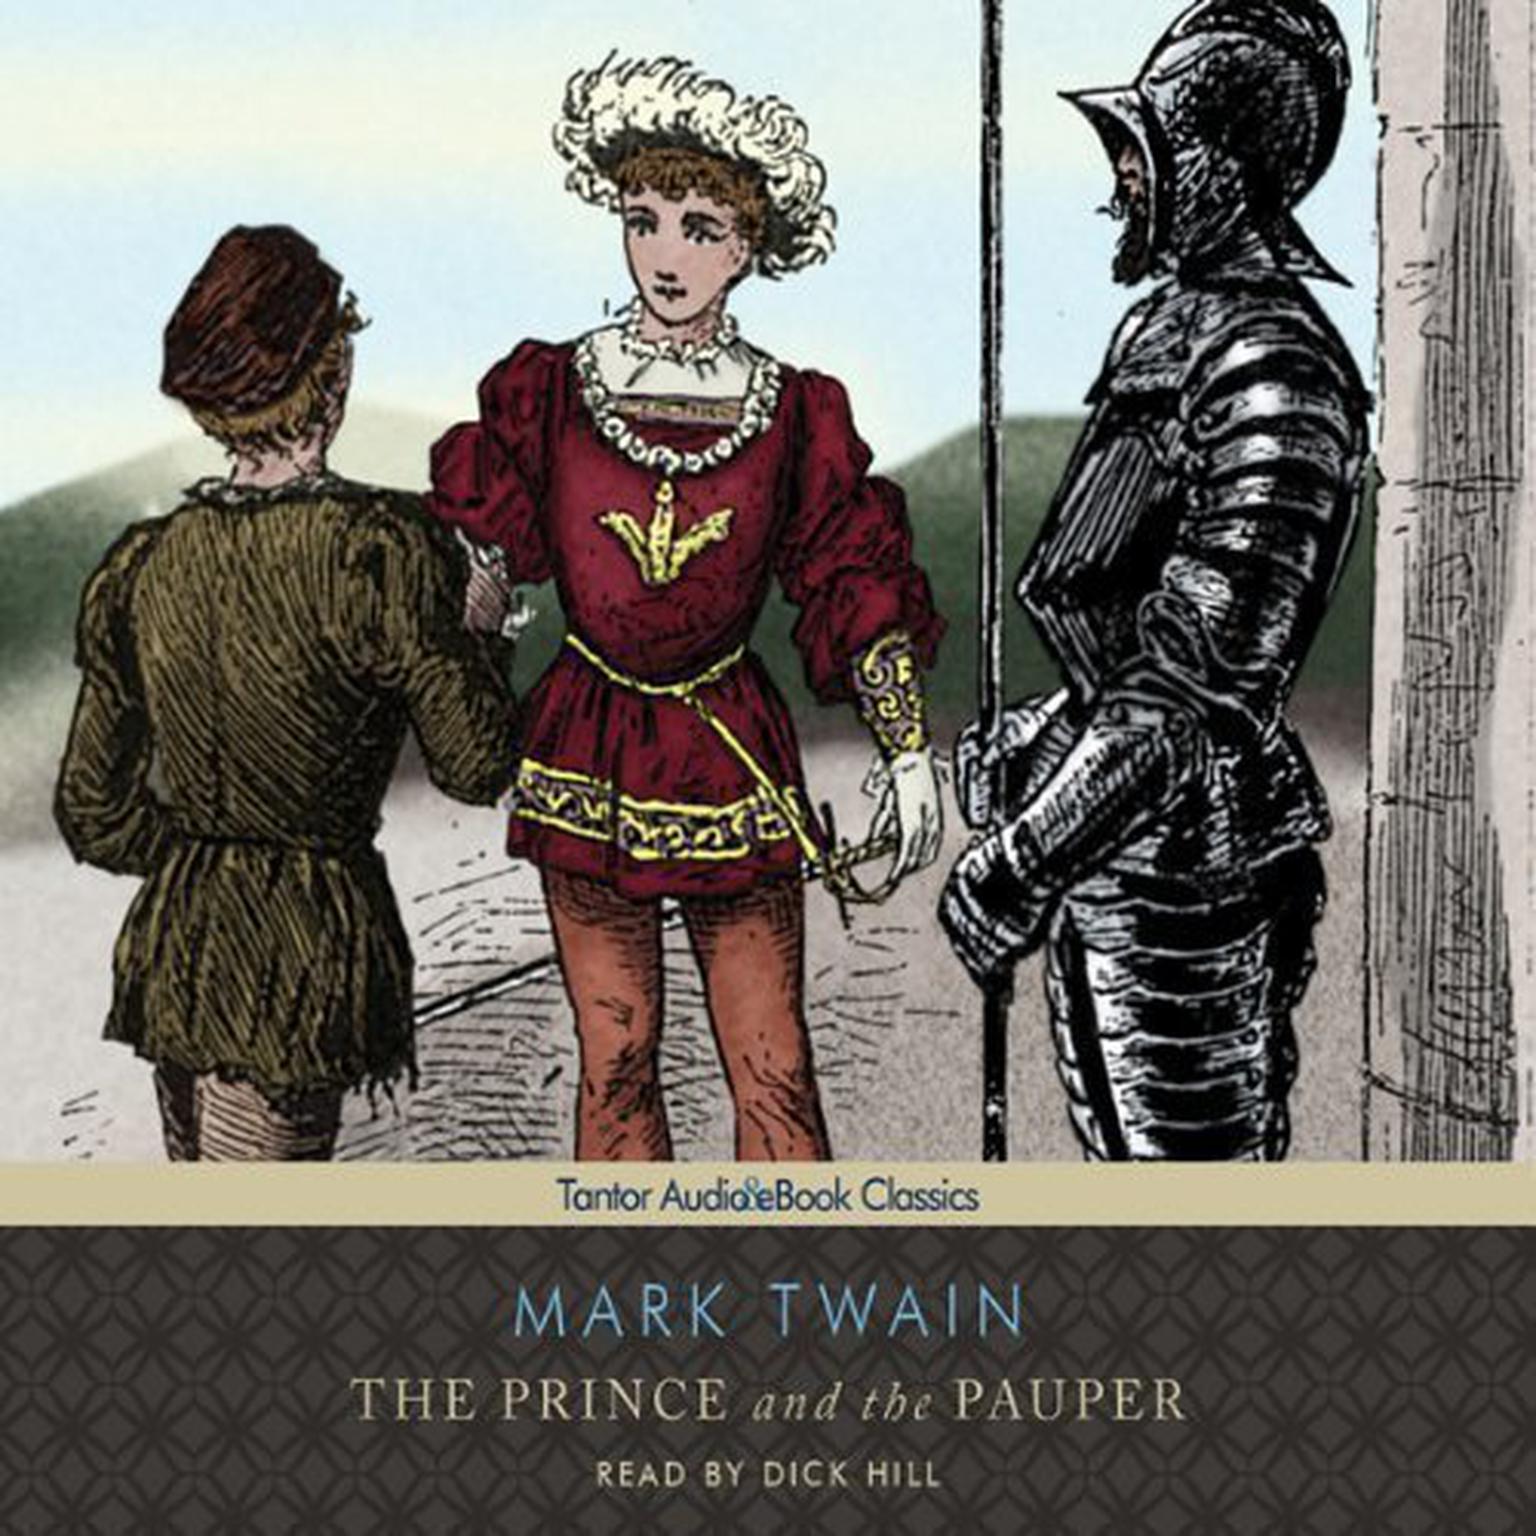 The Prince and the Pauper Audiobook, by Mark Twain